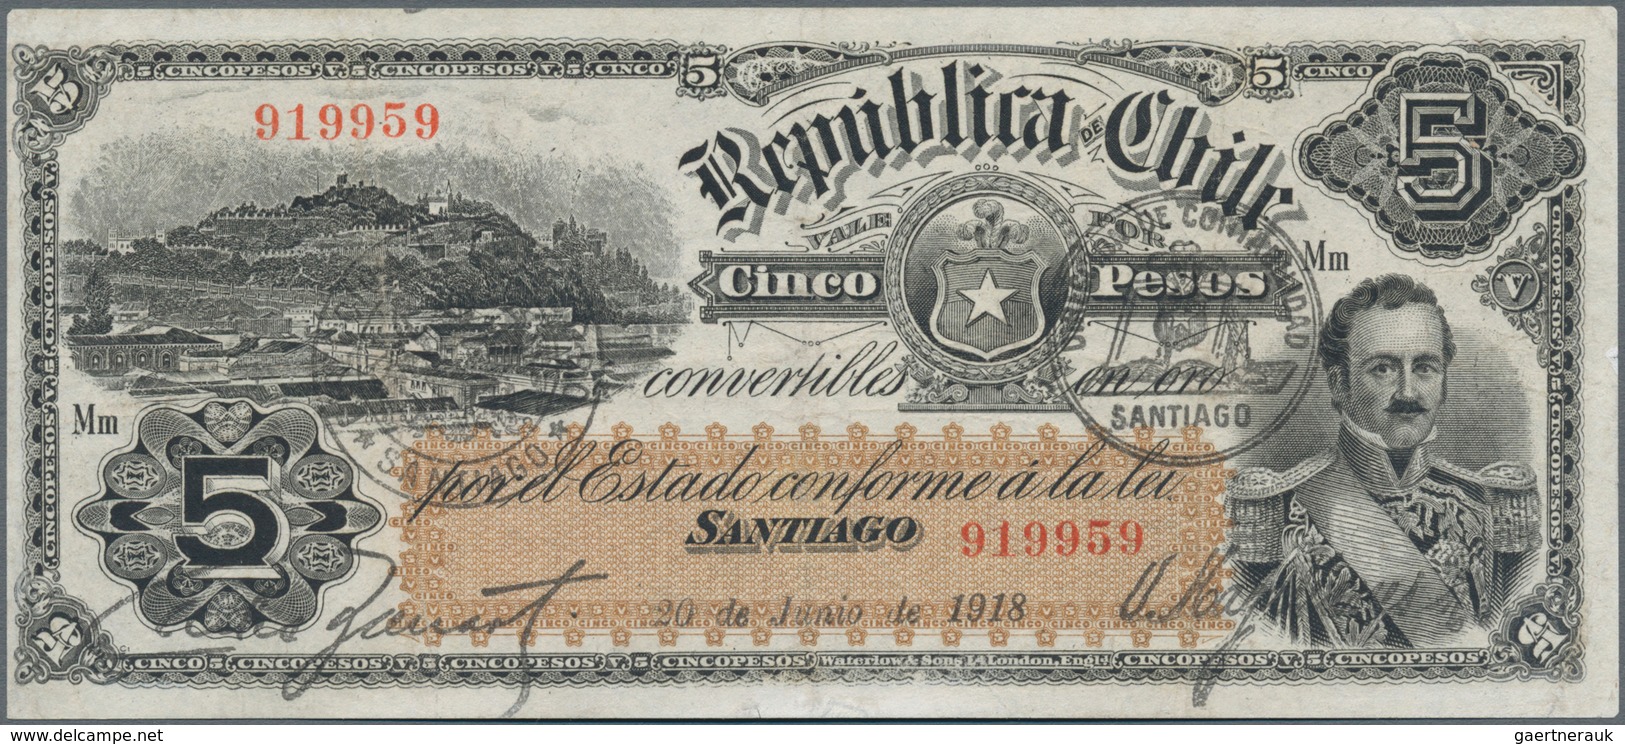 Chile: Republica De Chile 5 Pesos 1918, P.18, Great Condition With Strong Paper, Some Folds And Ligh - Chile